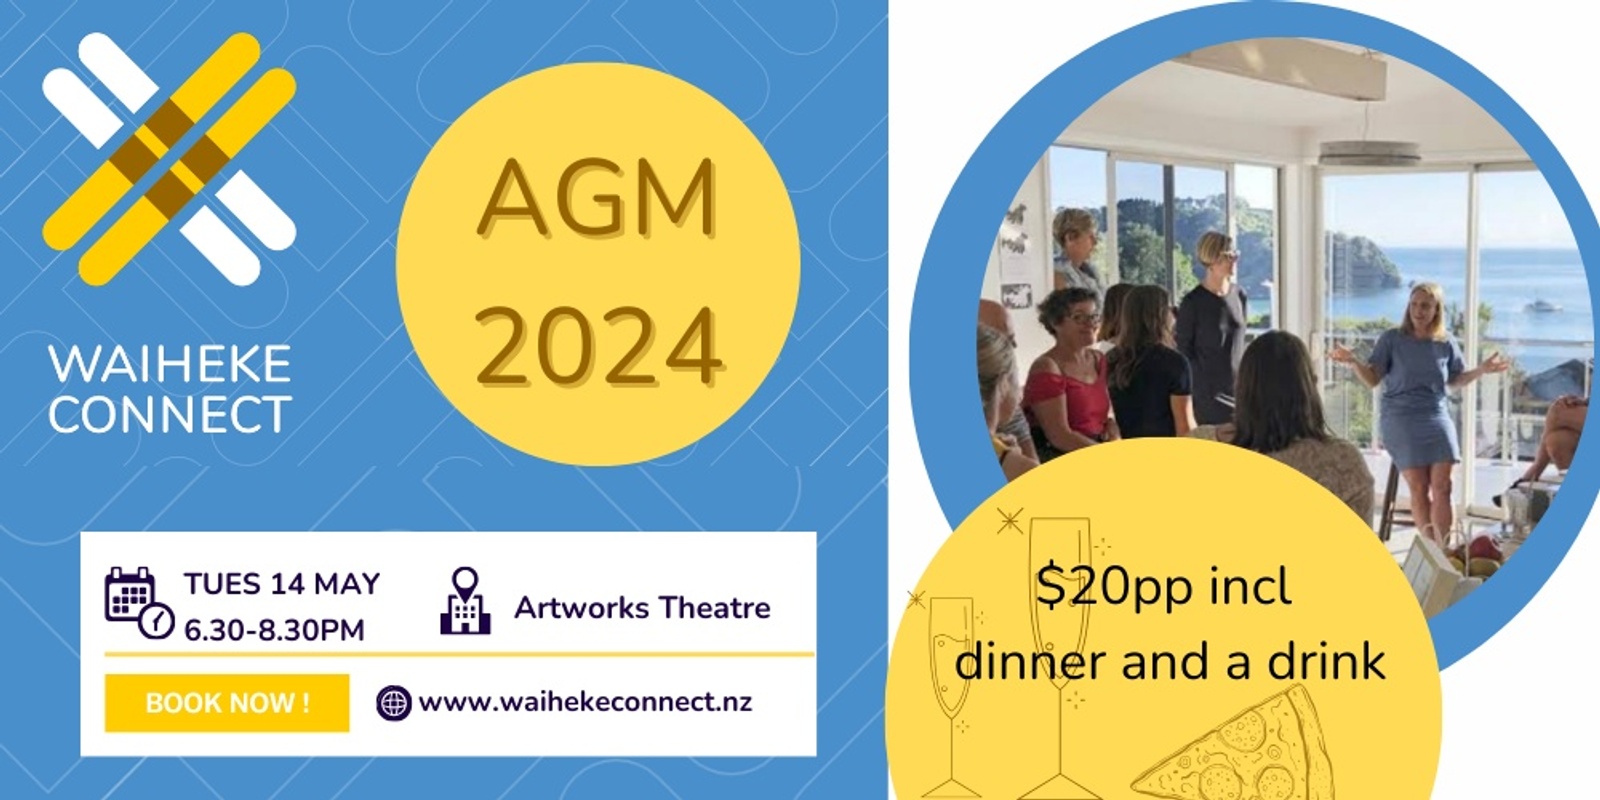 Banner image for Waiheke Connect AGM 2024 and social